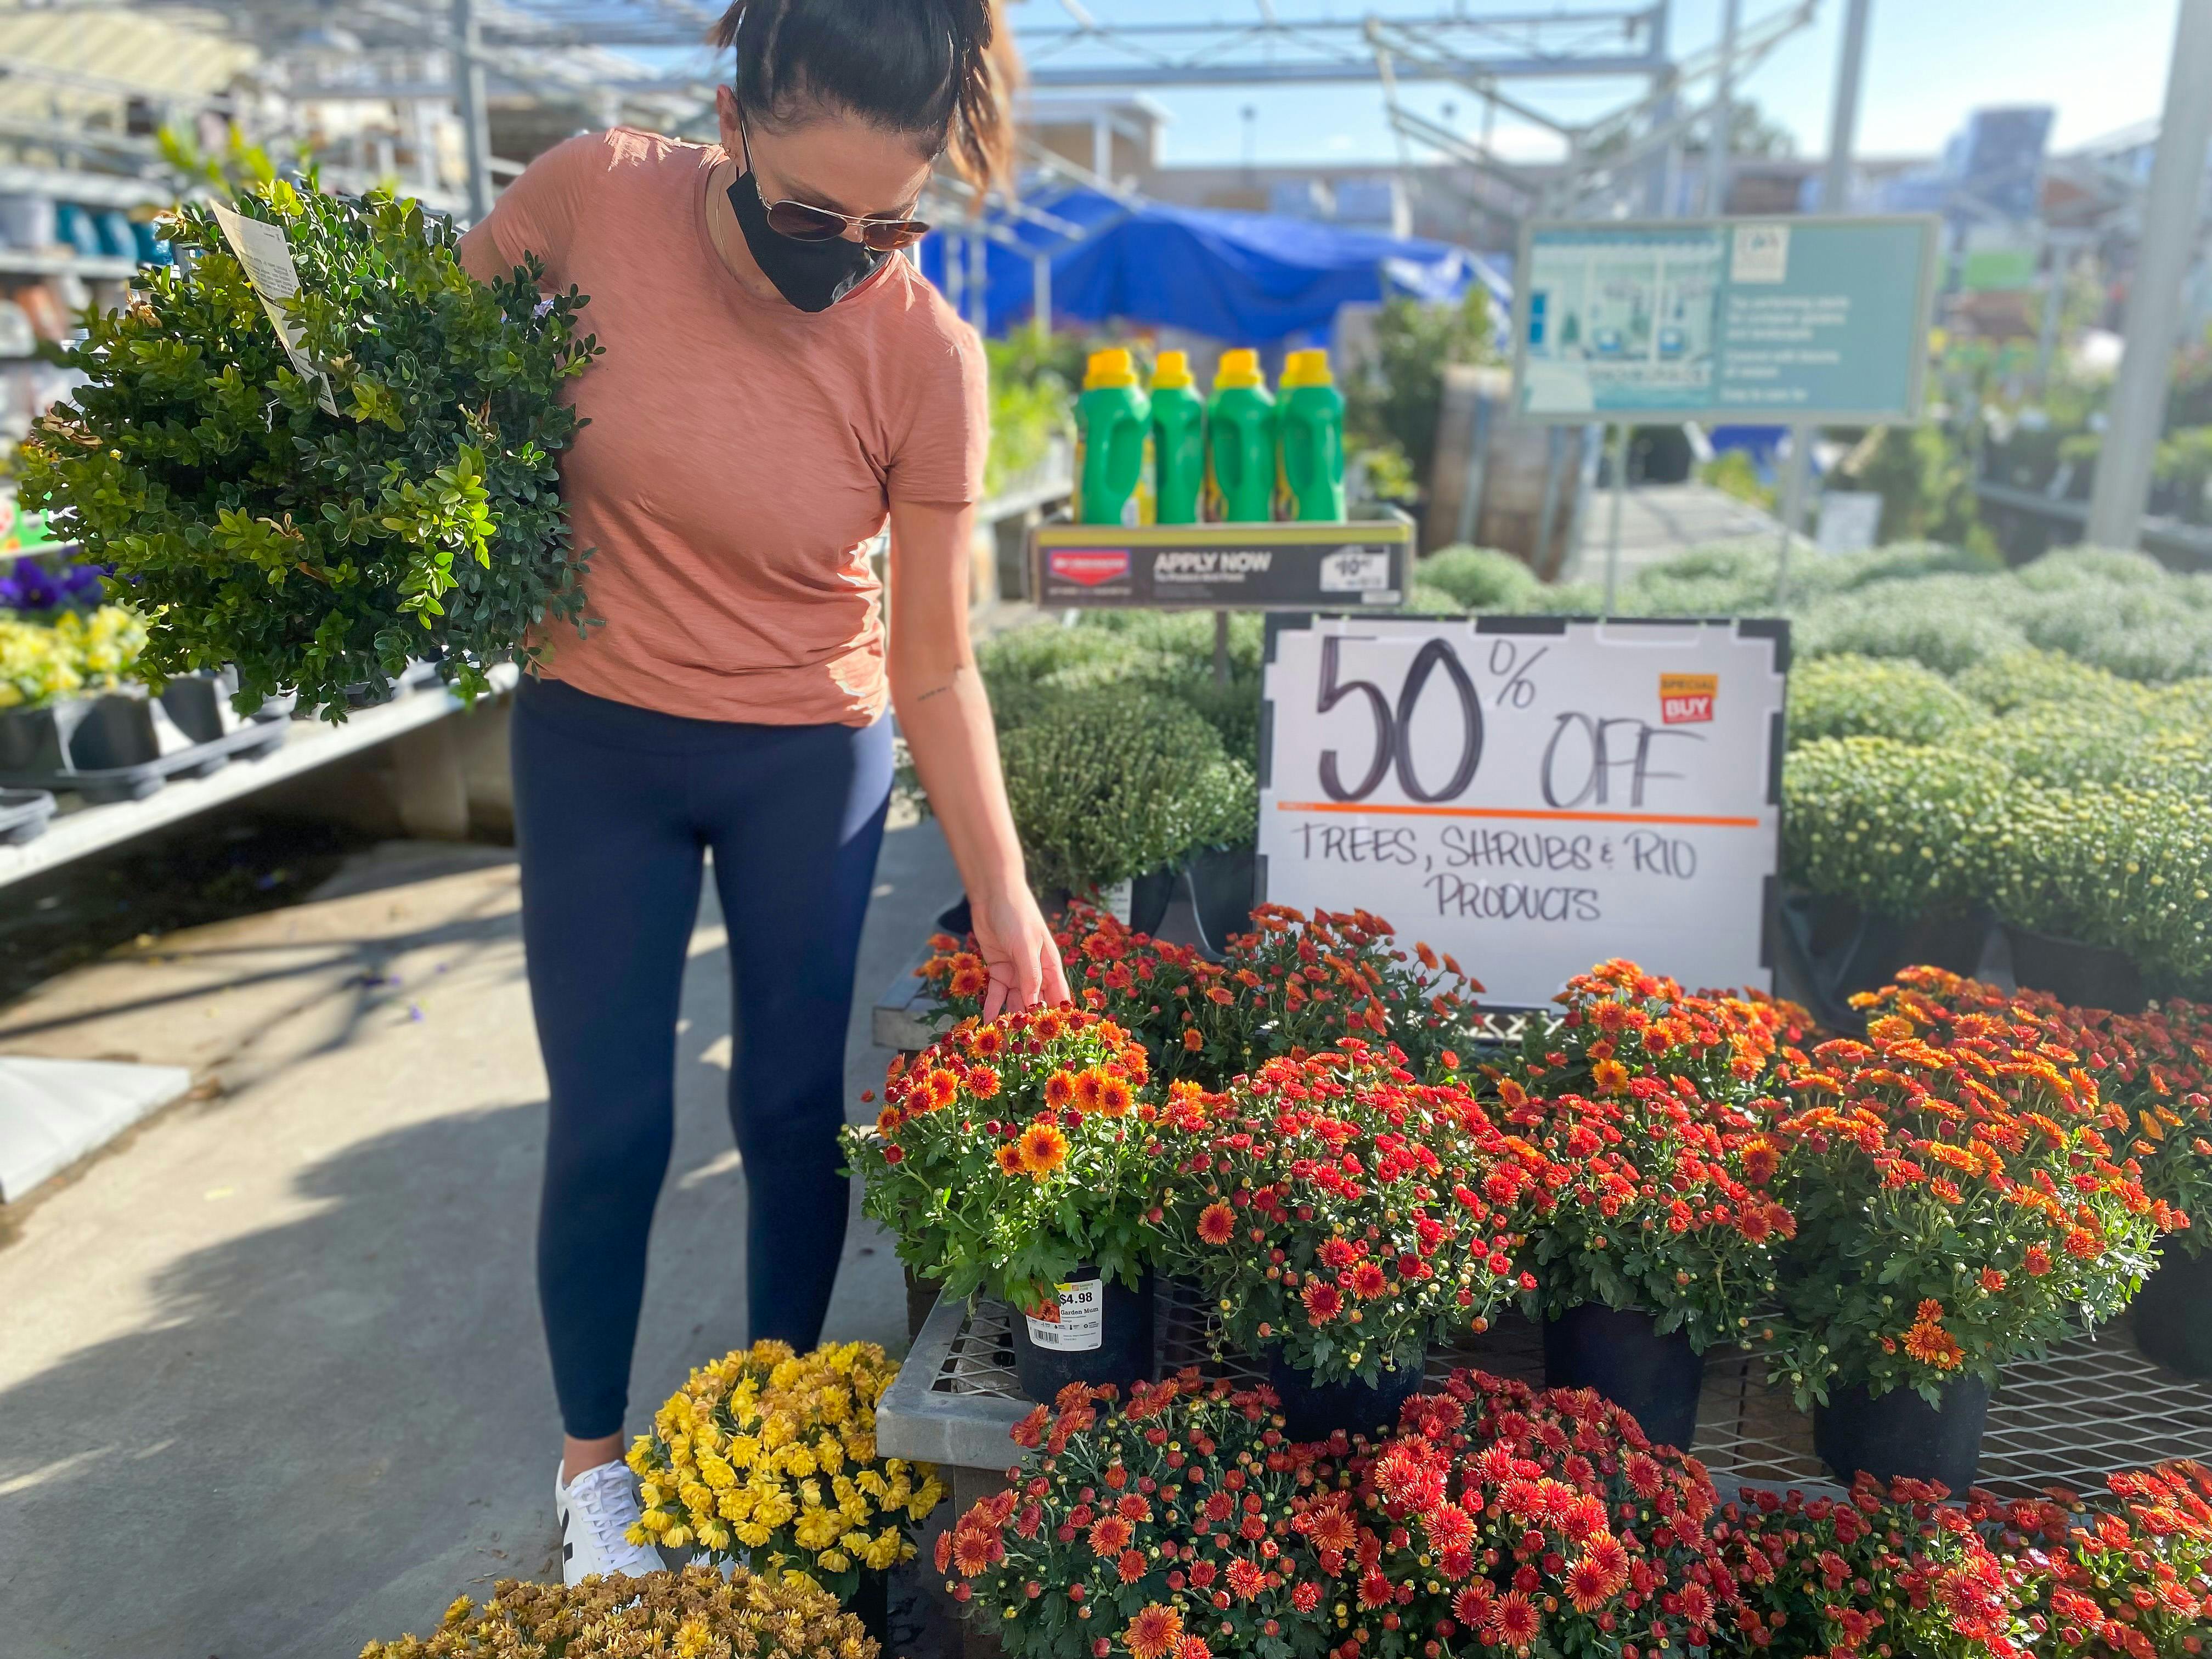 The Home Depot Fall Plant Clearance Joanie2 1644975976 1644975976 ?auto=compress